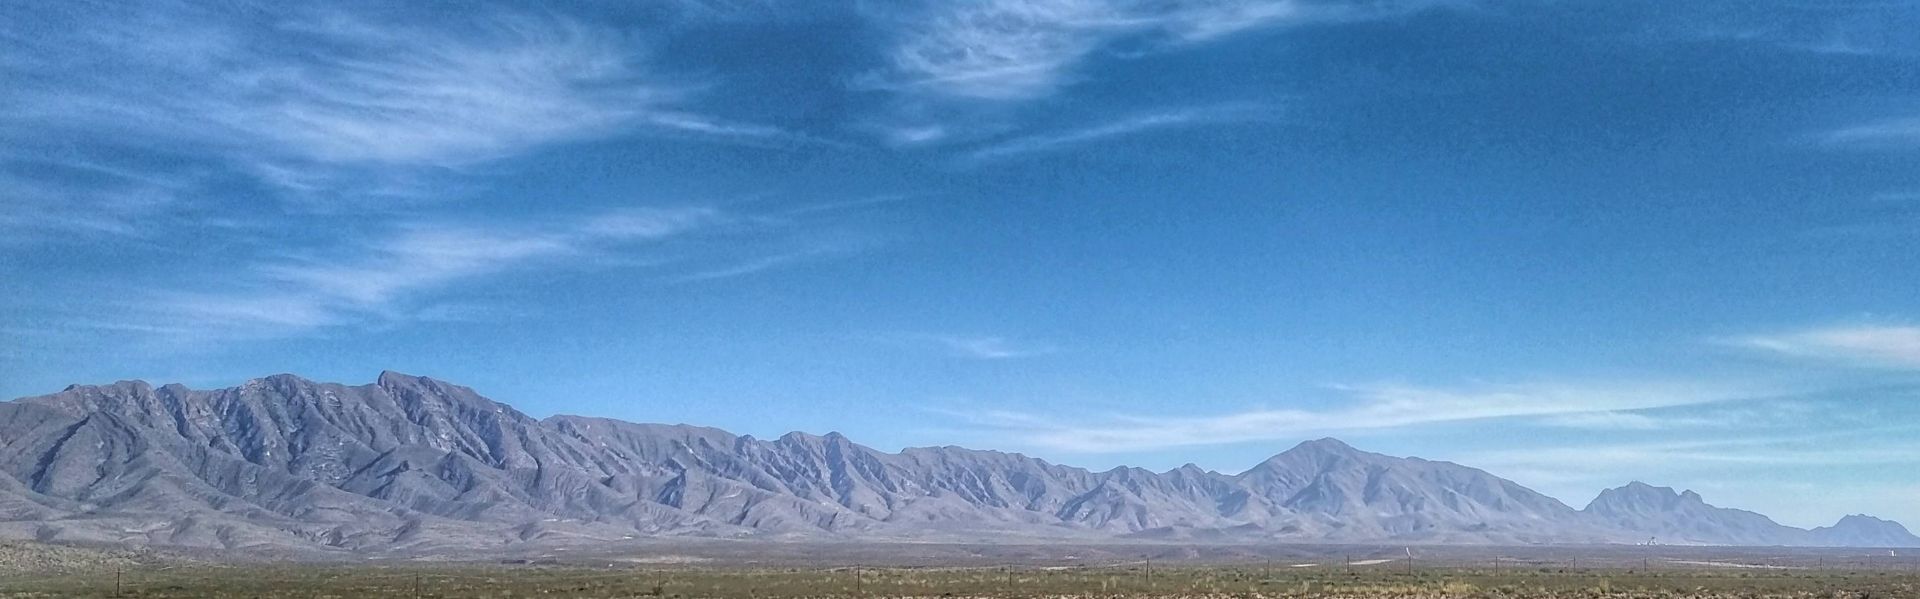 Photo of the Franklin Mountains as seen from Anthony, TX